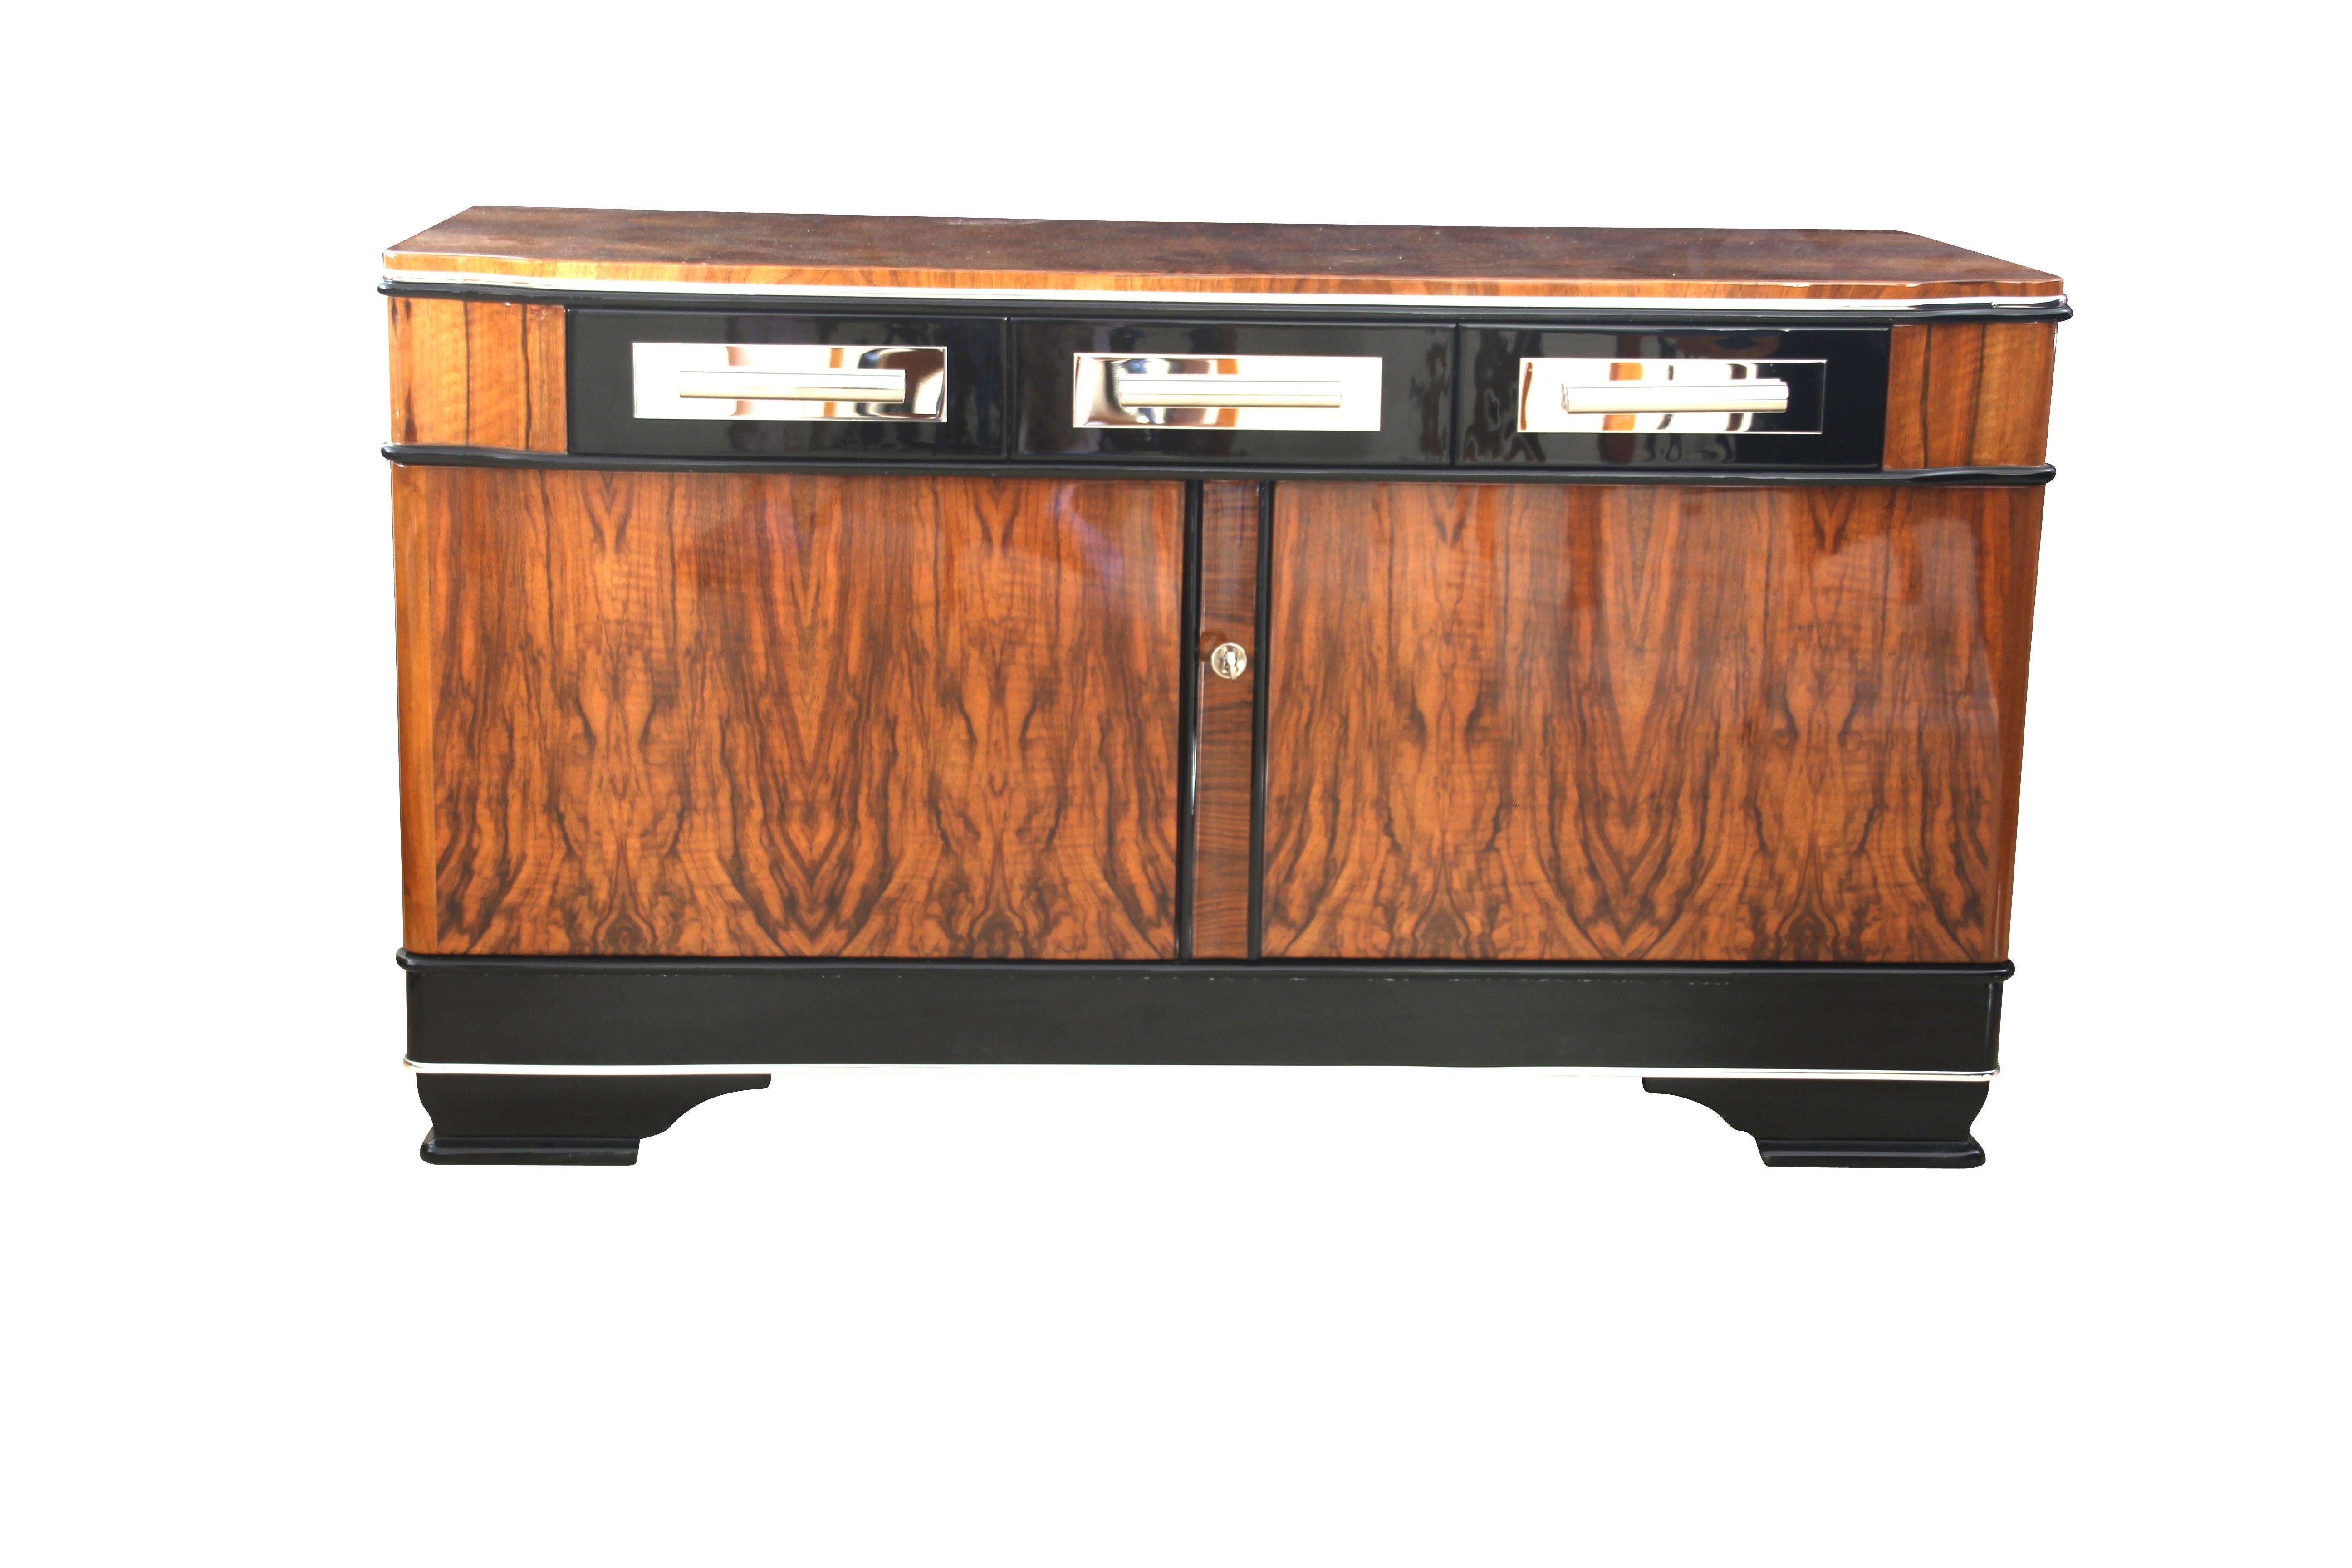 Classic Bauhaus Lowboard / Sideboard from Germany around 1930.

The furniture has a wonderful book-matched walnut veneer and partly ebonized areas.

At the front, there are two doors with three drawers above. Around the base a the top of the